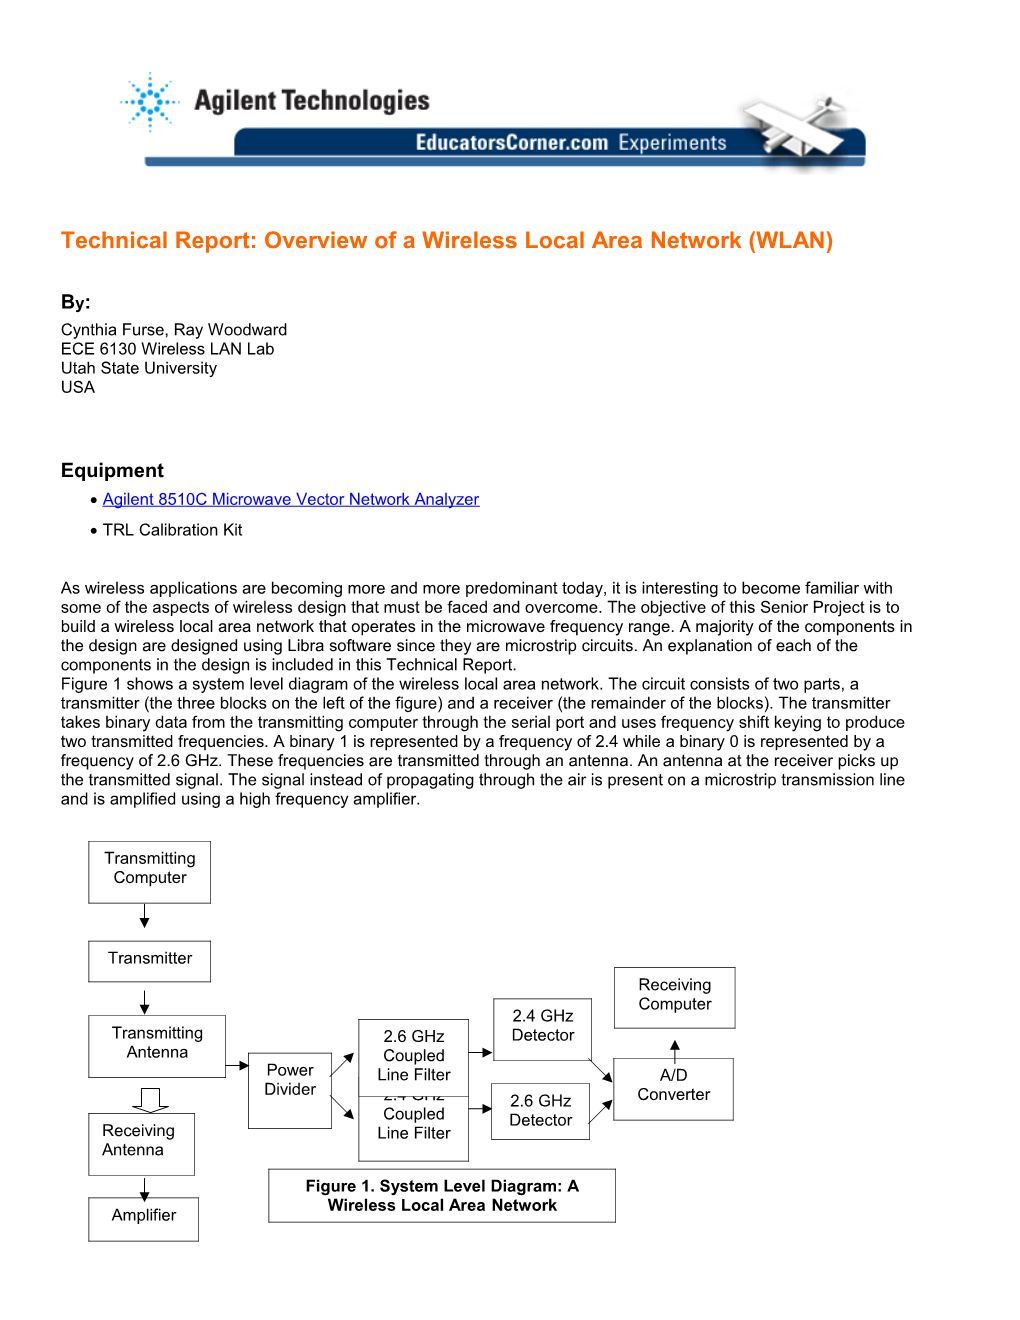 Technical Report: Overview of a Wireless Local Area Network (WLAN)